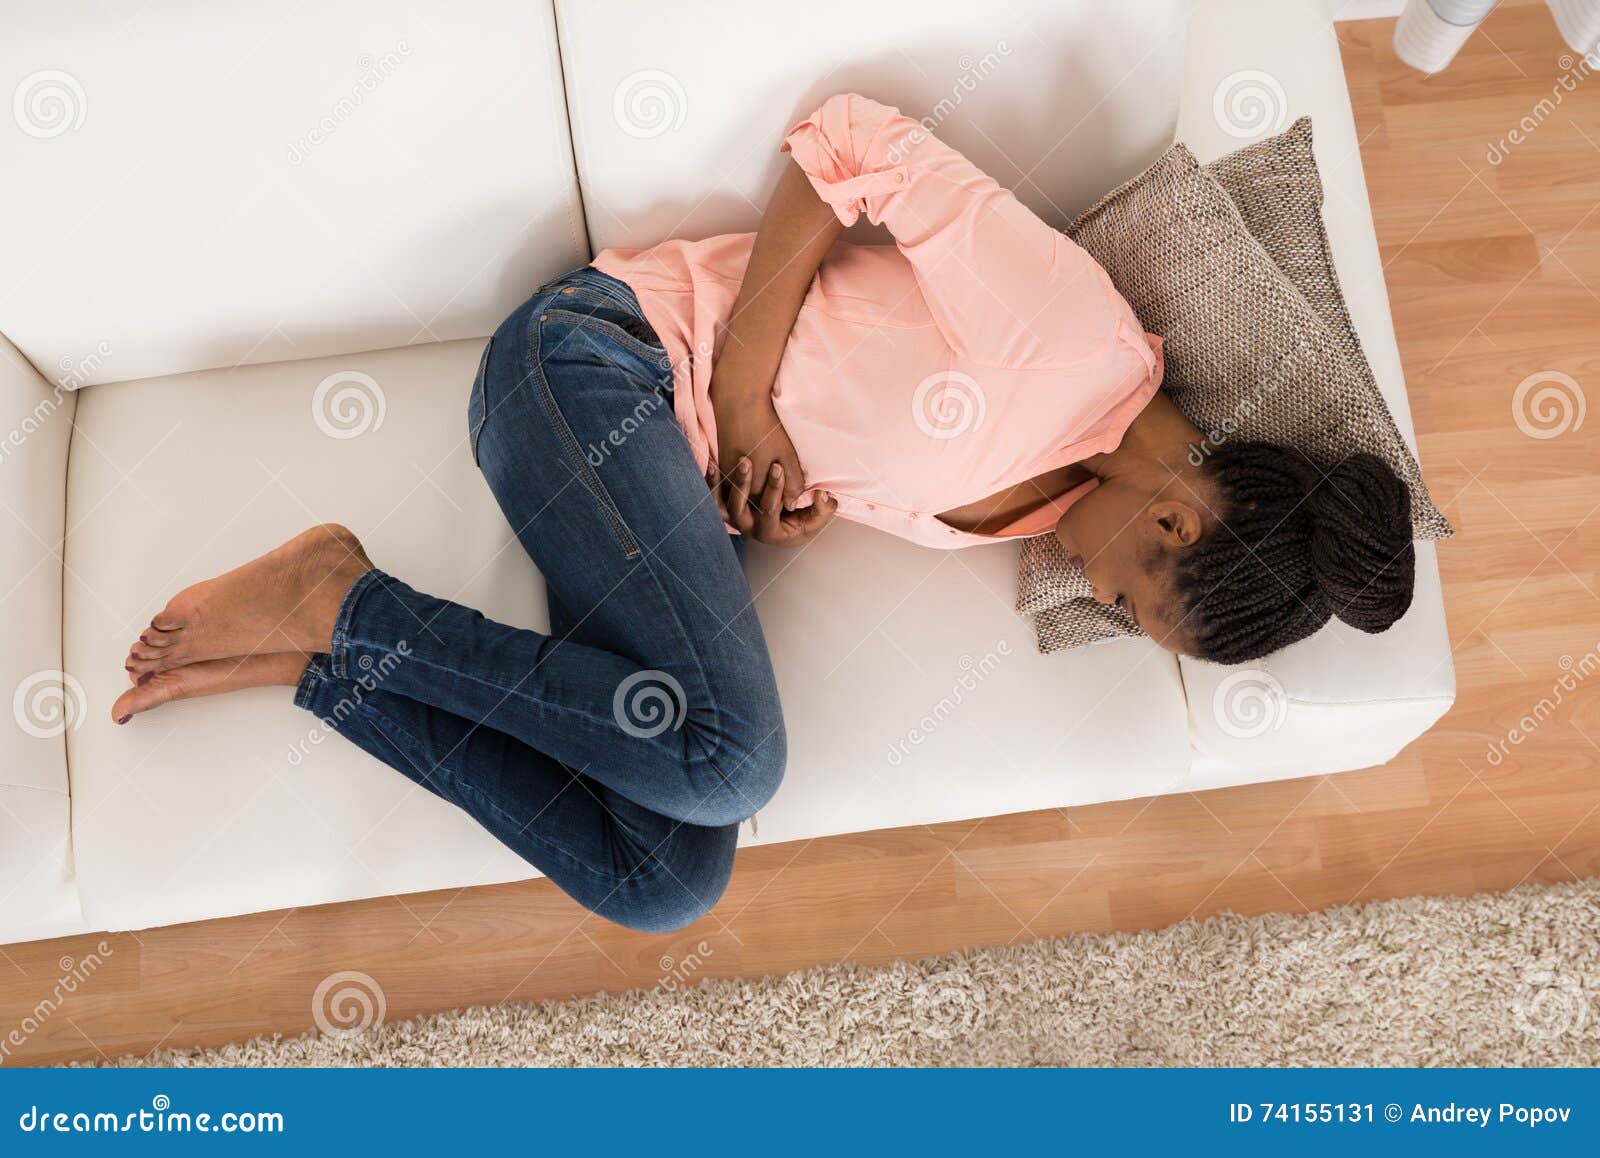 woman with stomach ache lying on sofa